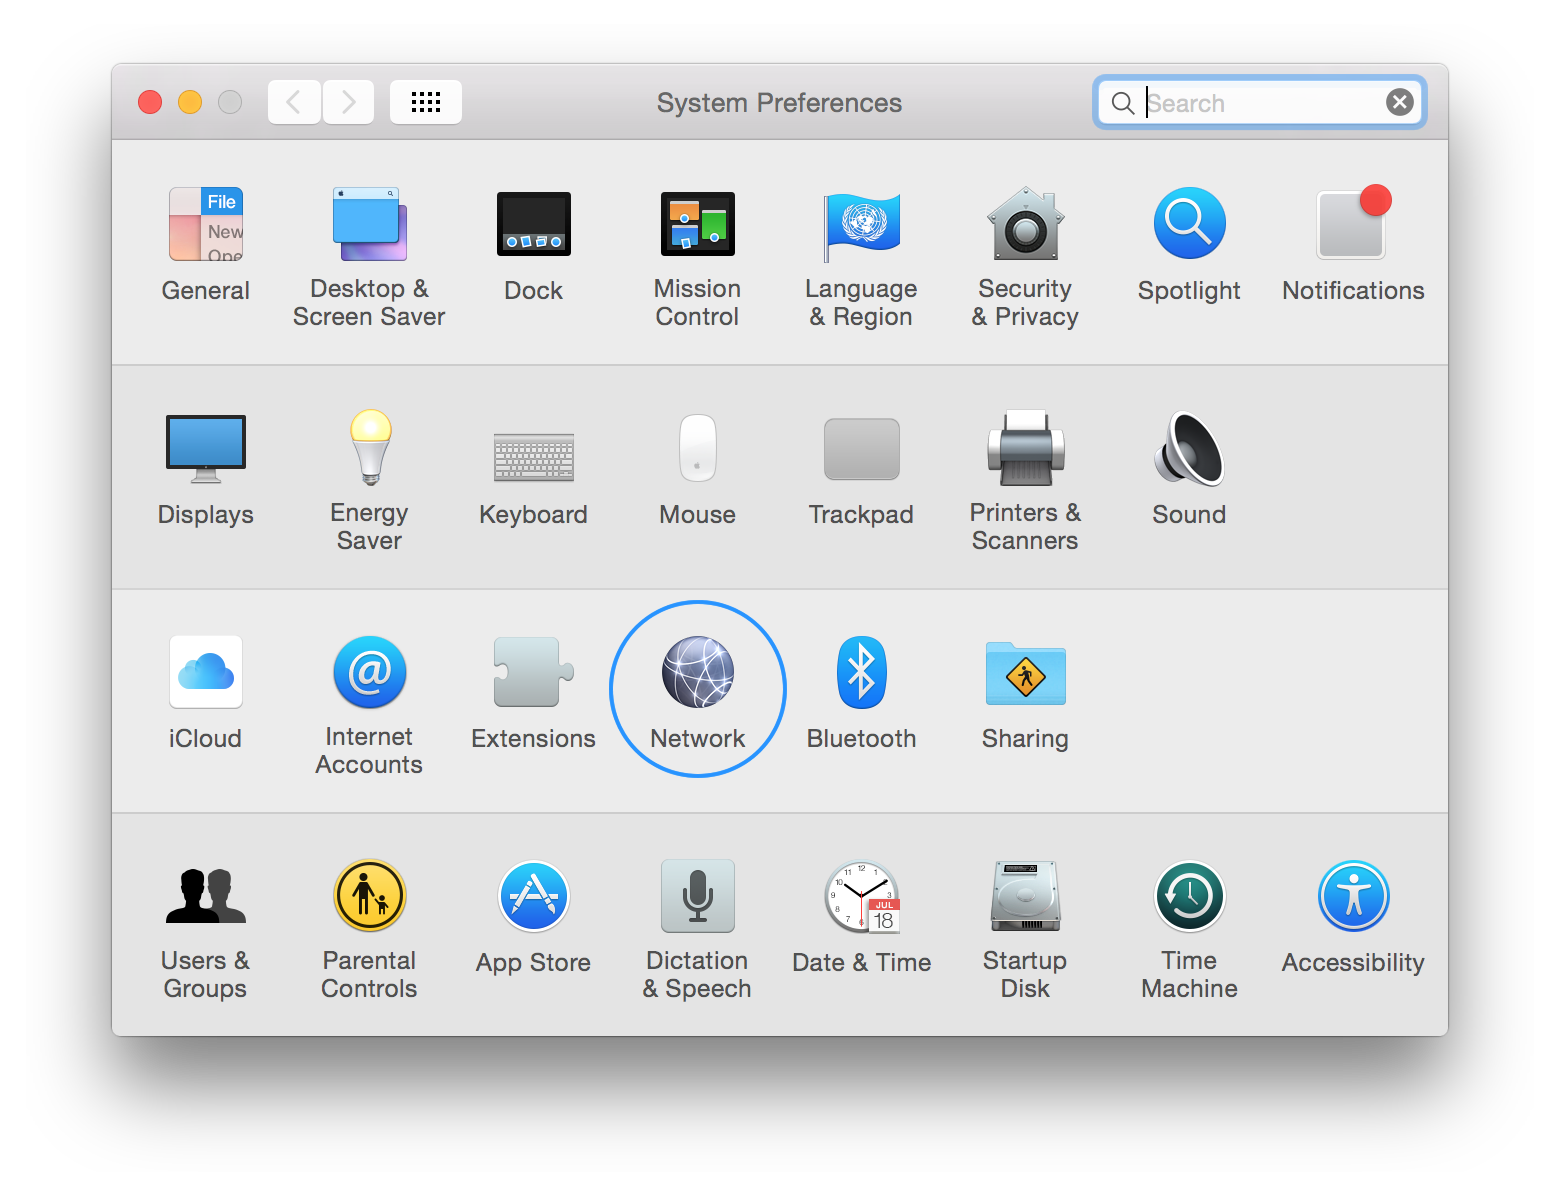 First, open the System Preferences by going to the Apple menu and choosing System Preferences. Or choose System Preferences from the Dock. And click on the Network system preference.